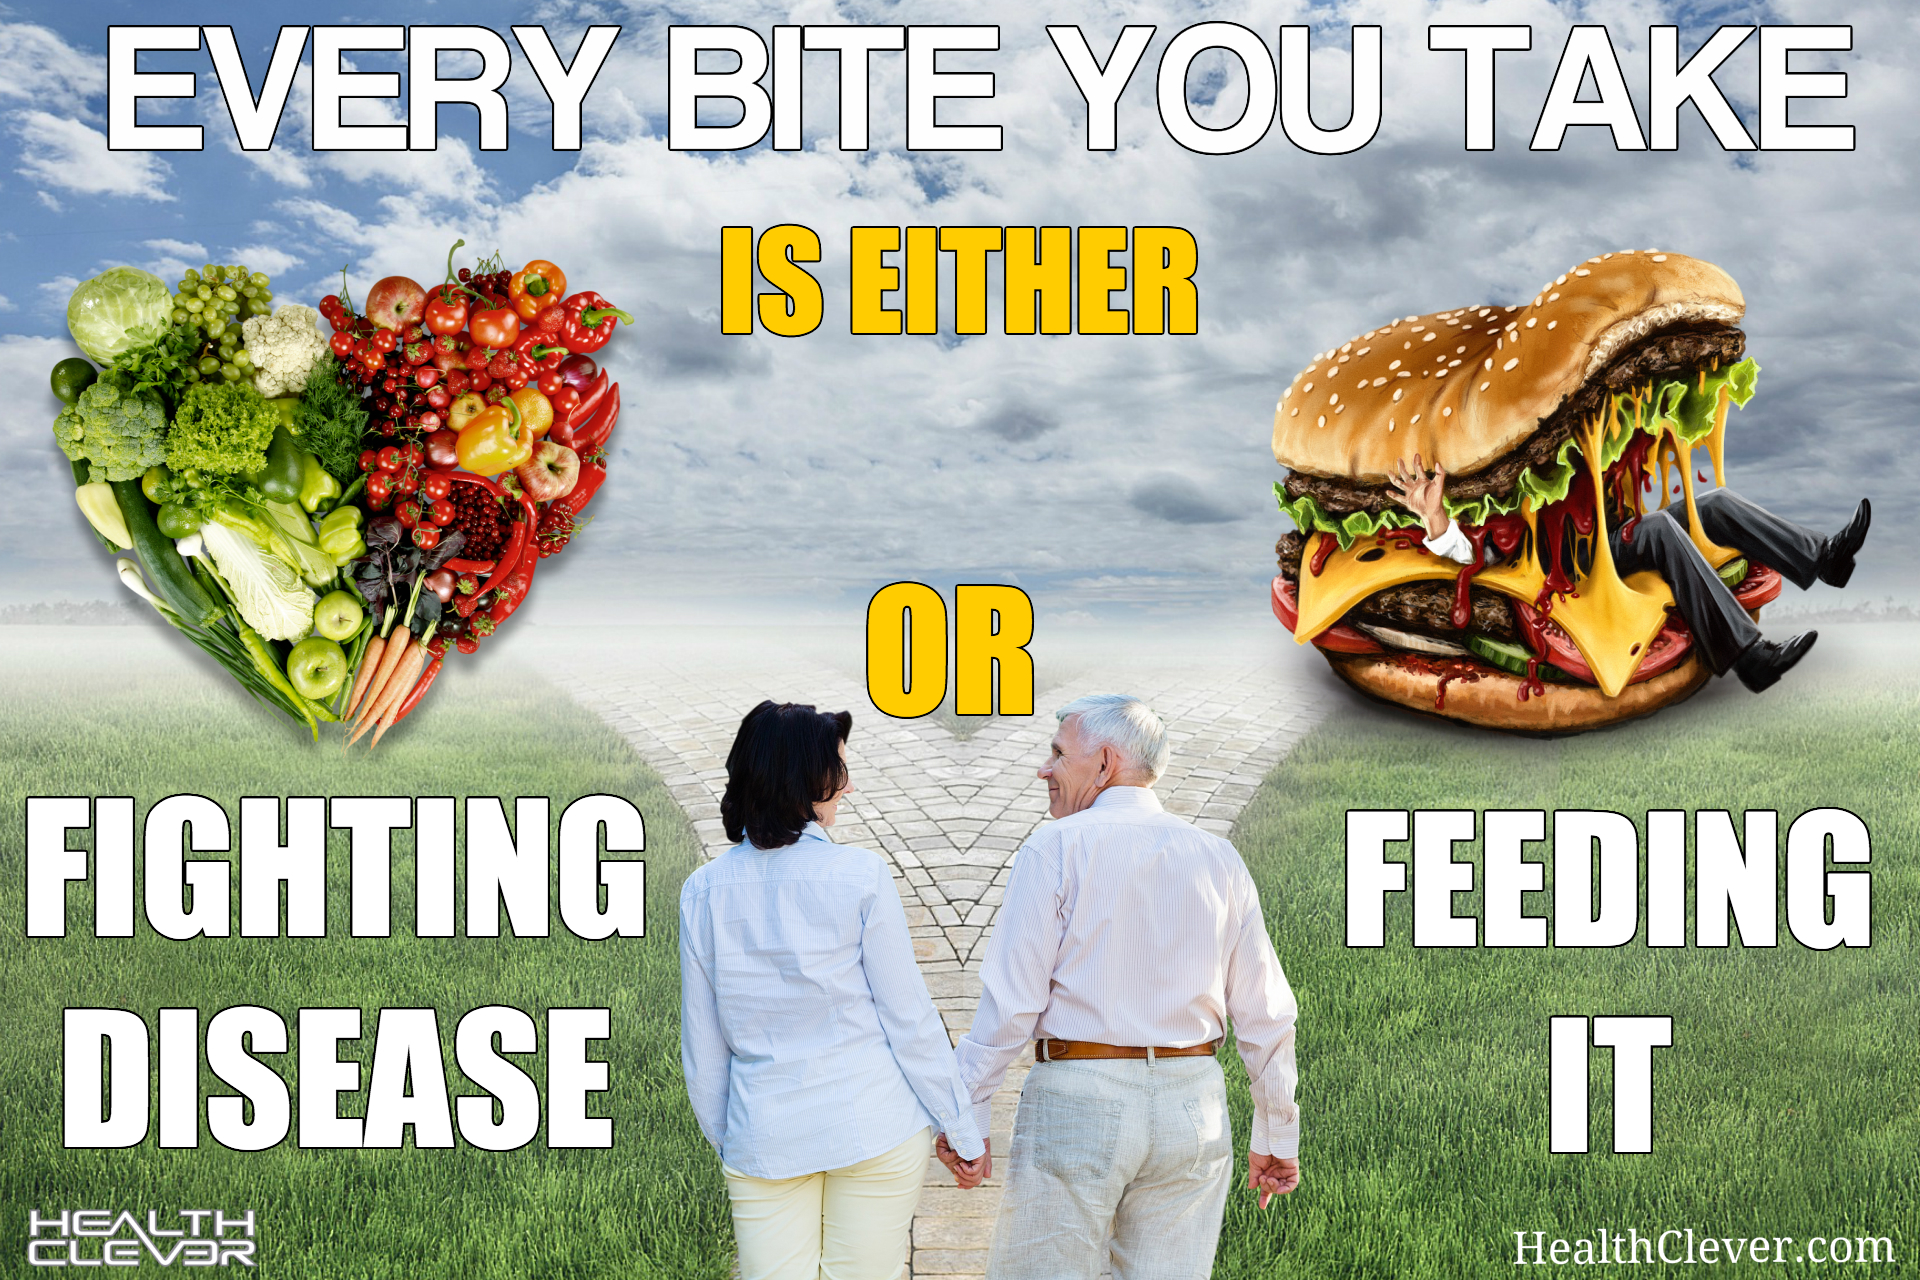 You are what you eat. What you eat matters